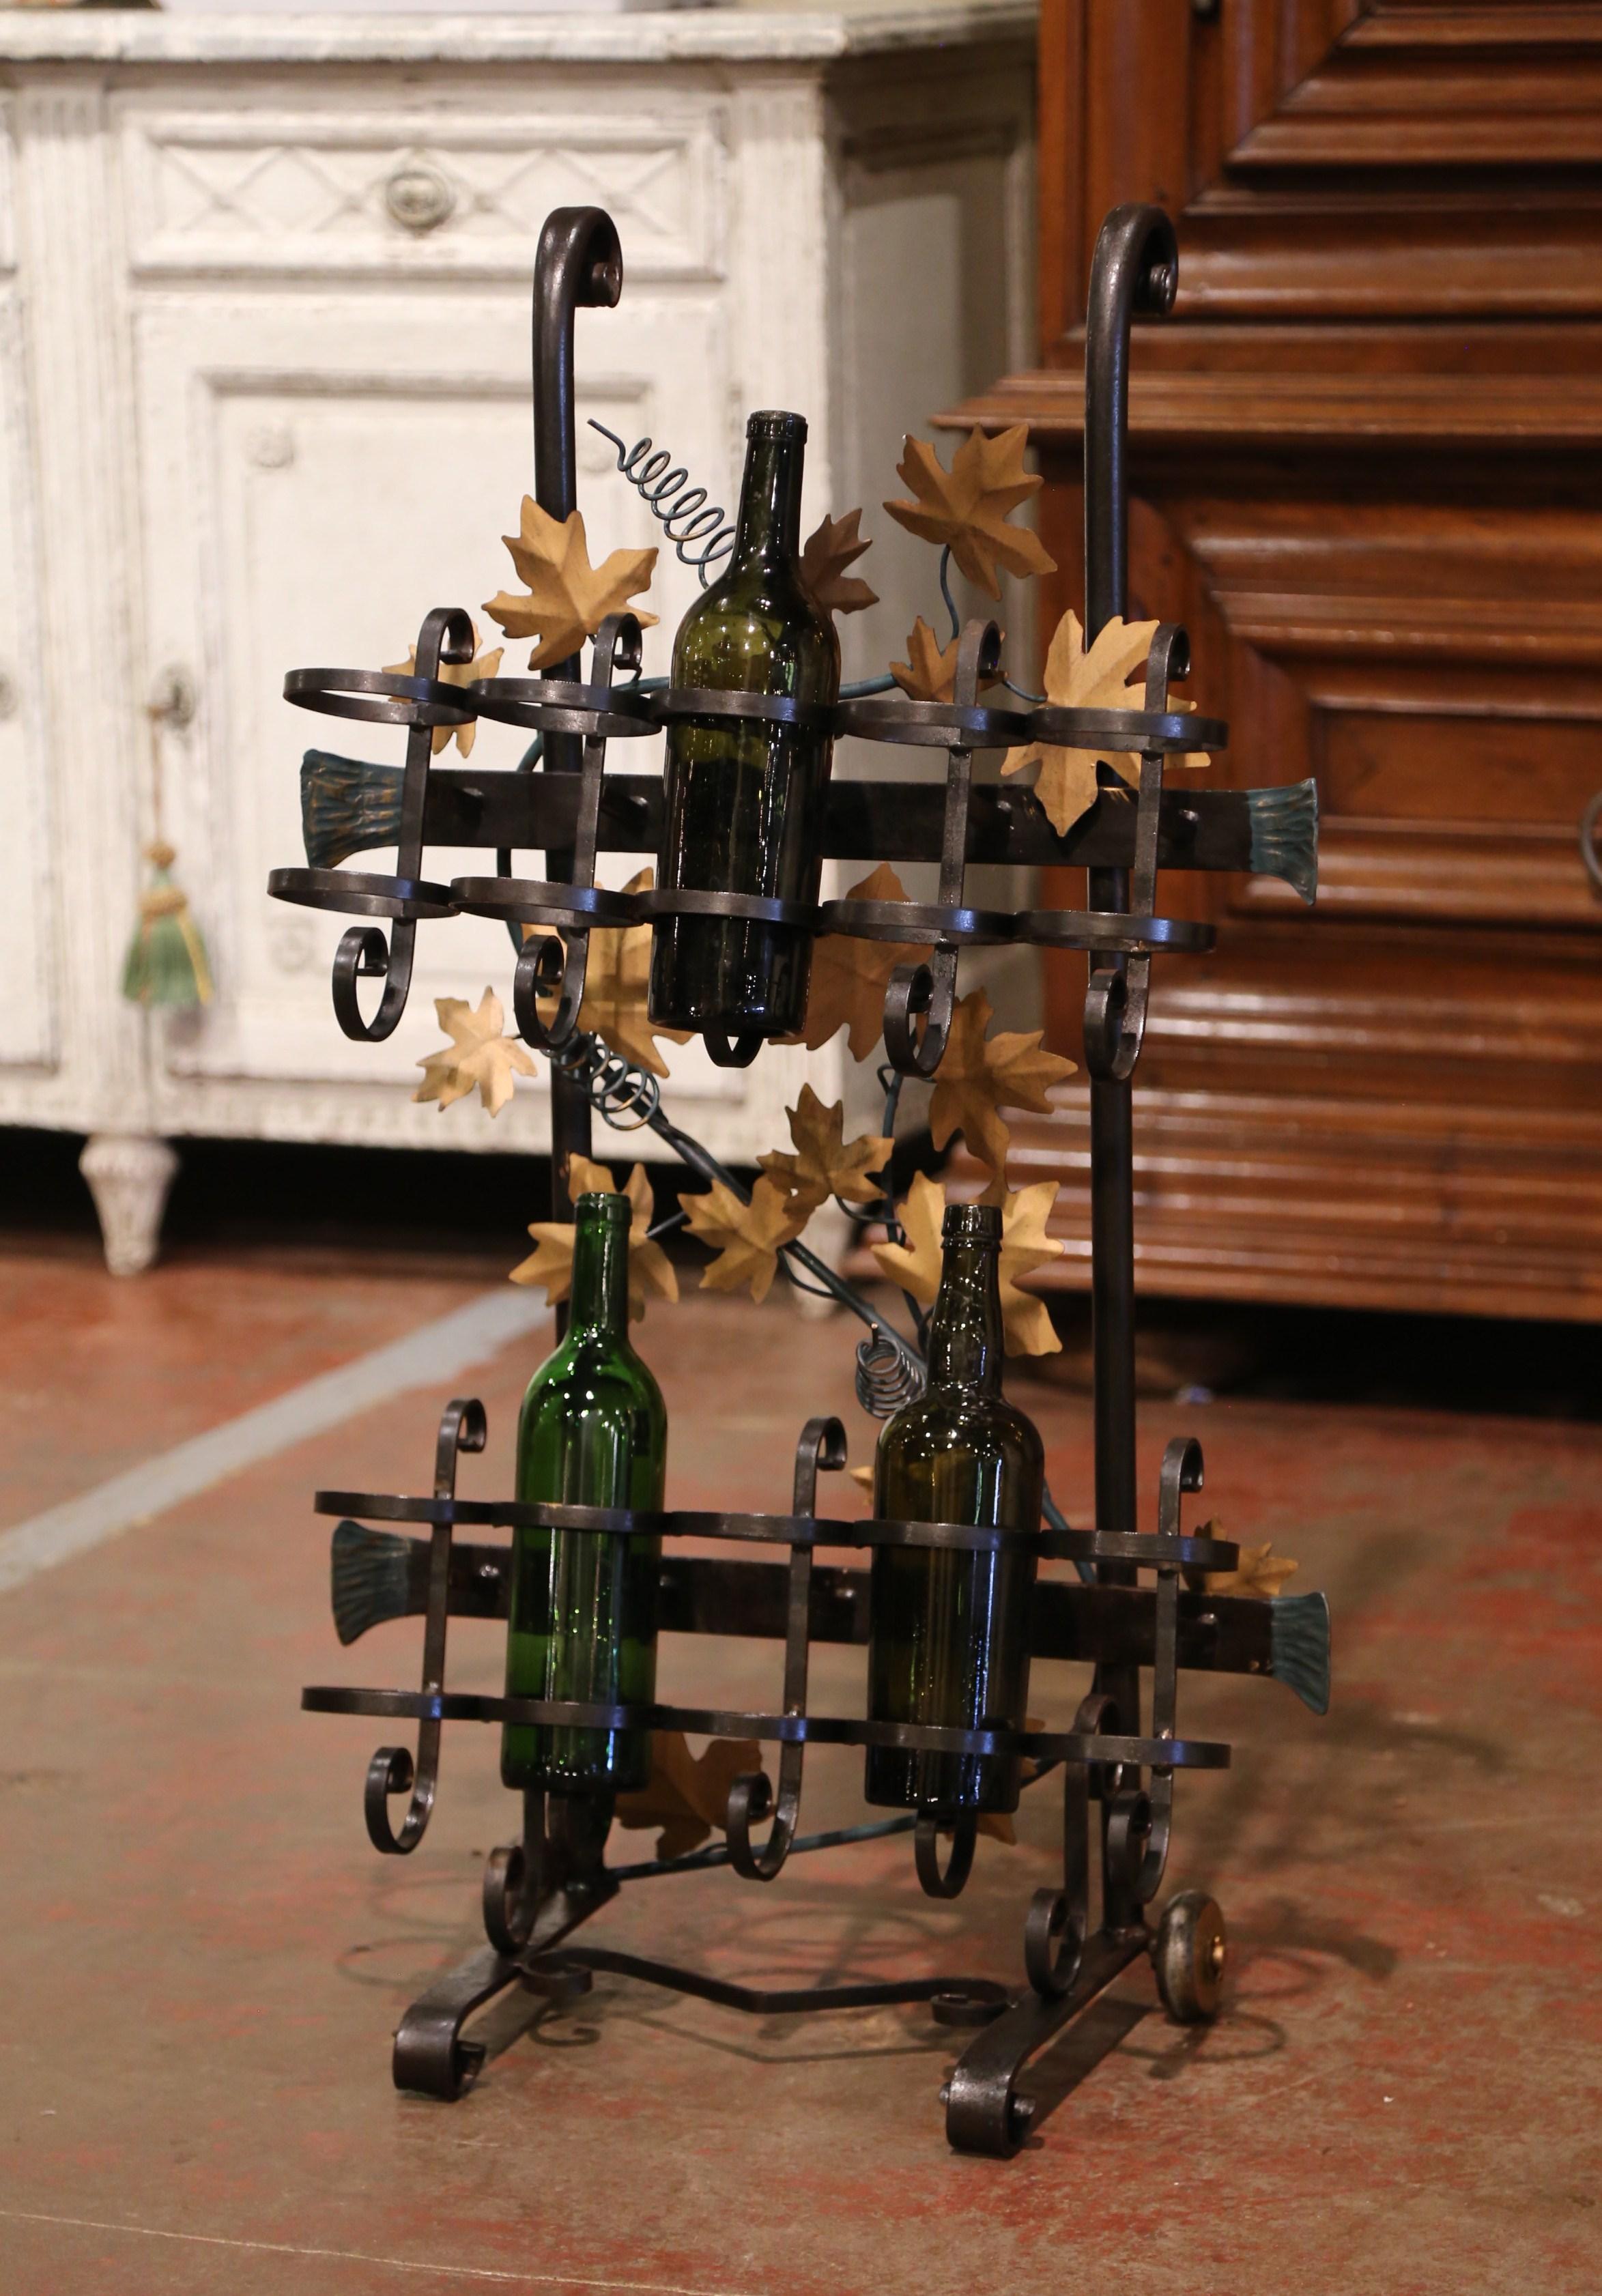 Crafted in the Rhone region of France circa 2000, the cart is forged of iron and decorated with gold painted metal vine leaves. The rack with front handles and back wheels for easy handling, features two rows of five bottle cups and will hold up to